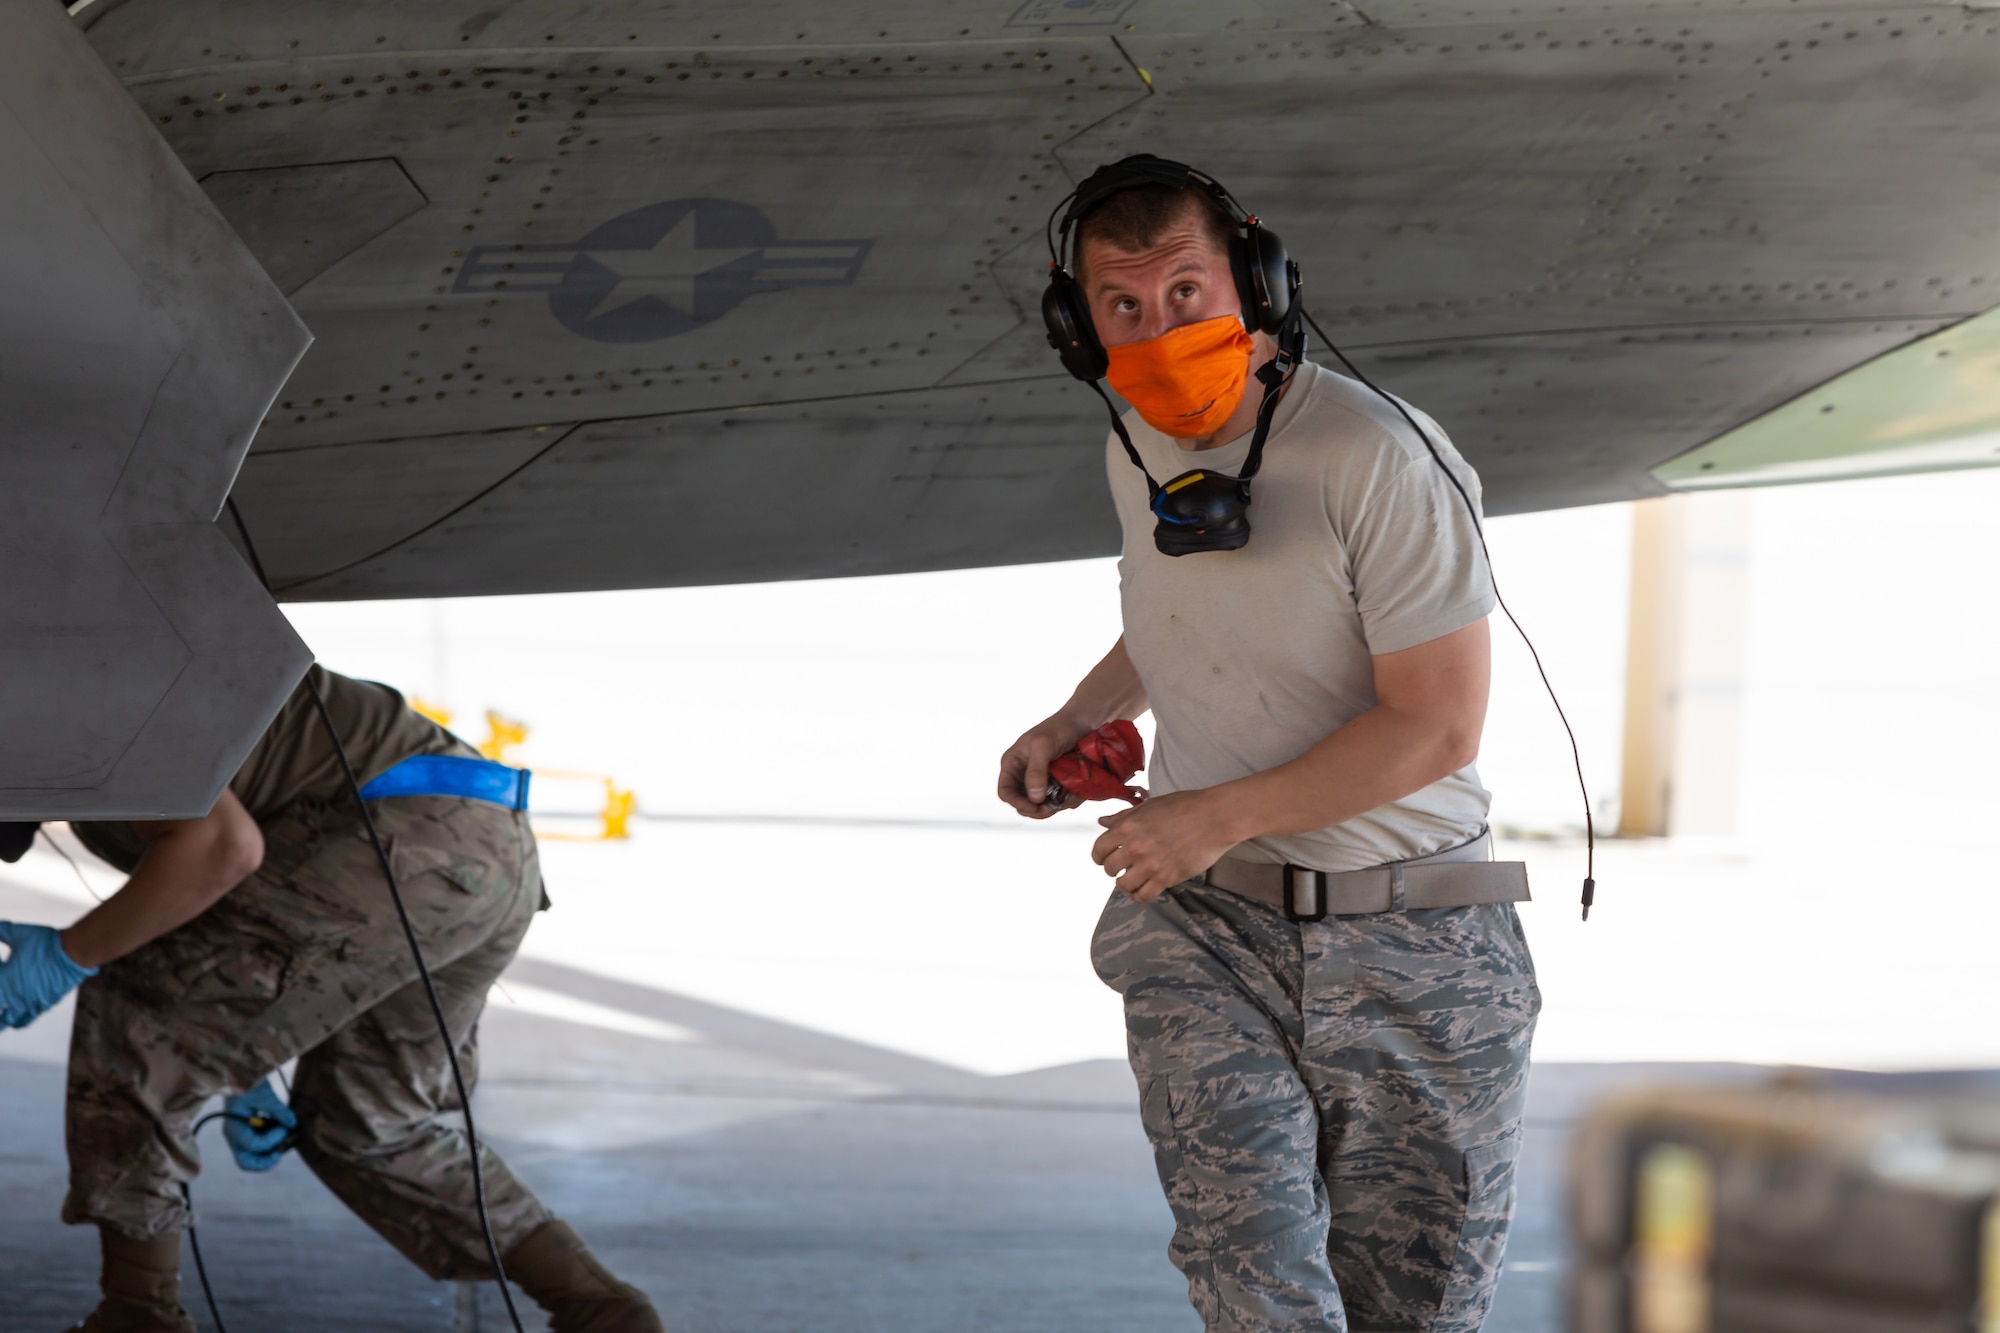 Tech. Sgt. Dustin Packer, 412th Aircraft Maintenance Squadron, conducts a visual inspection of an F-22 Raptor as part of an operational rapid crew swap at Edwards Air Force Base, California, April 30. (Photo courtesy of Kyle Larson/Lockheed-Martin)